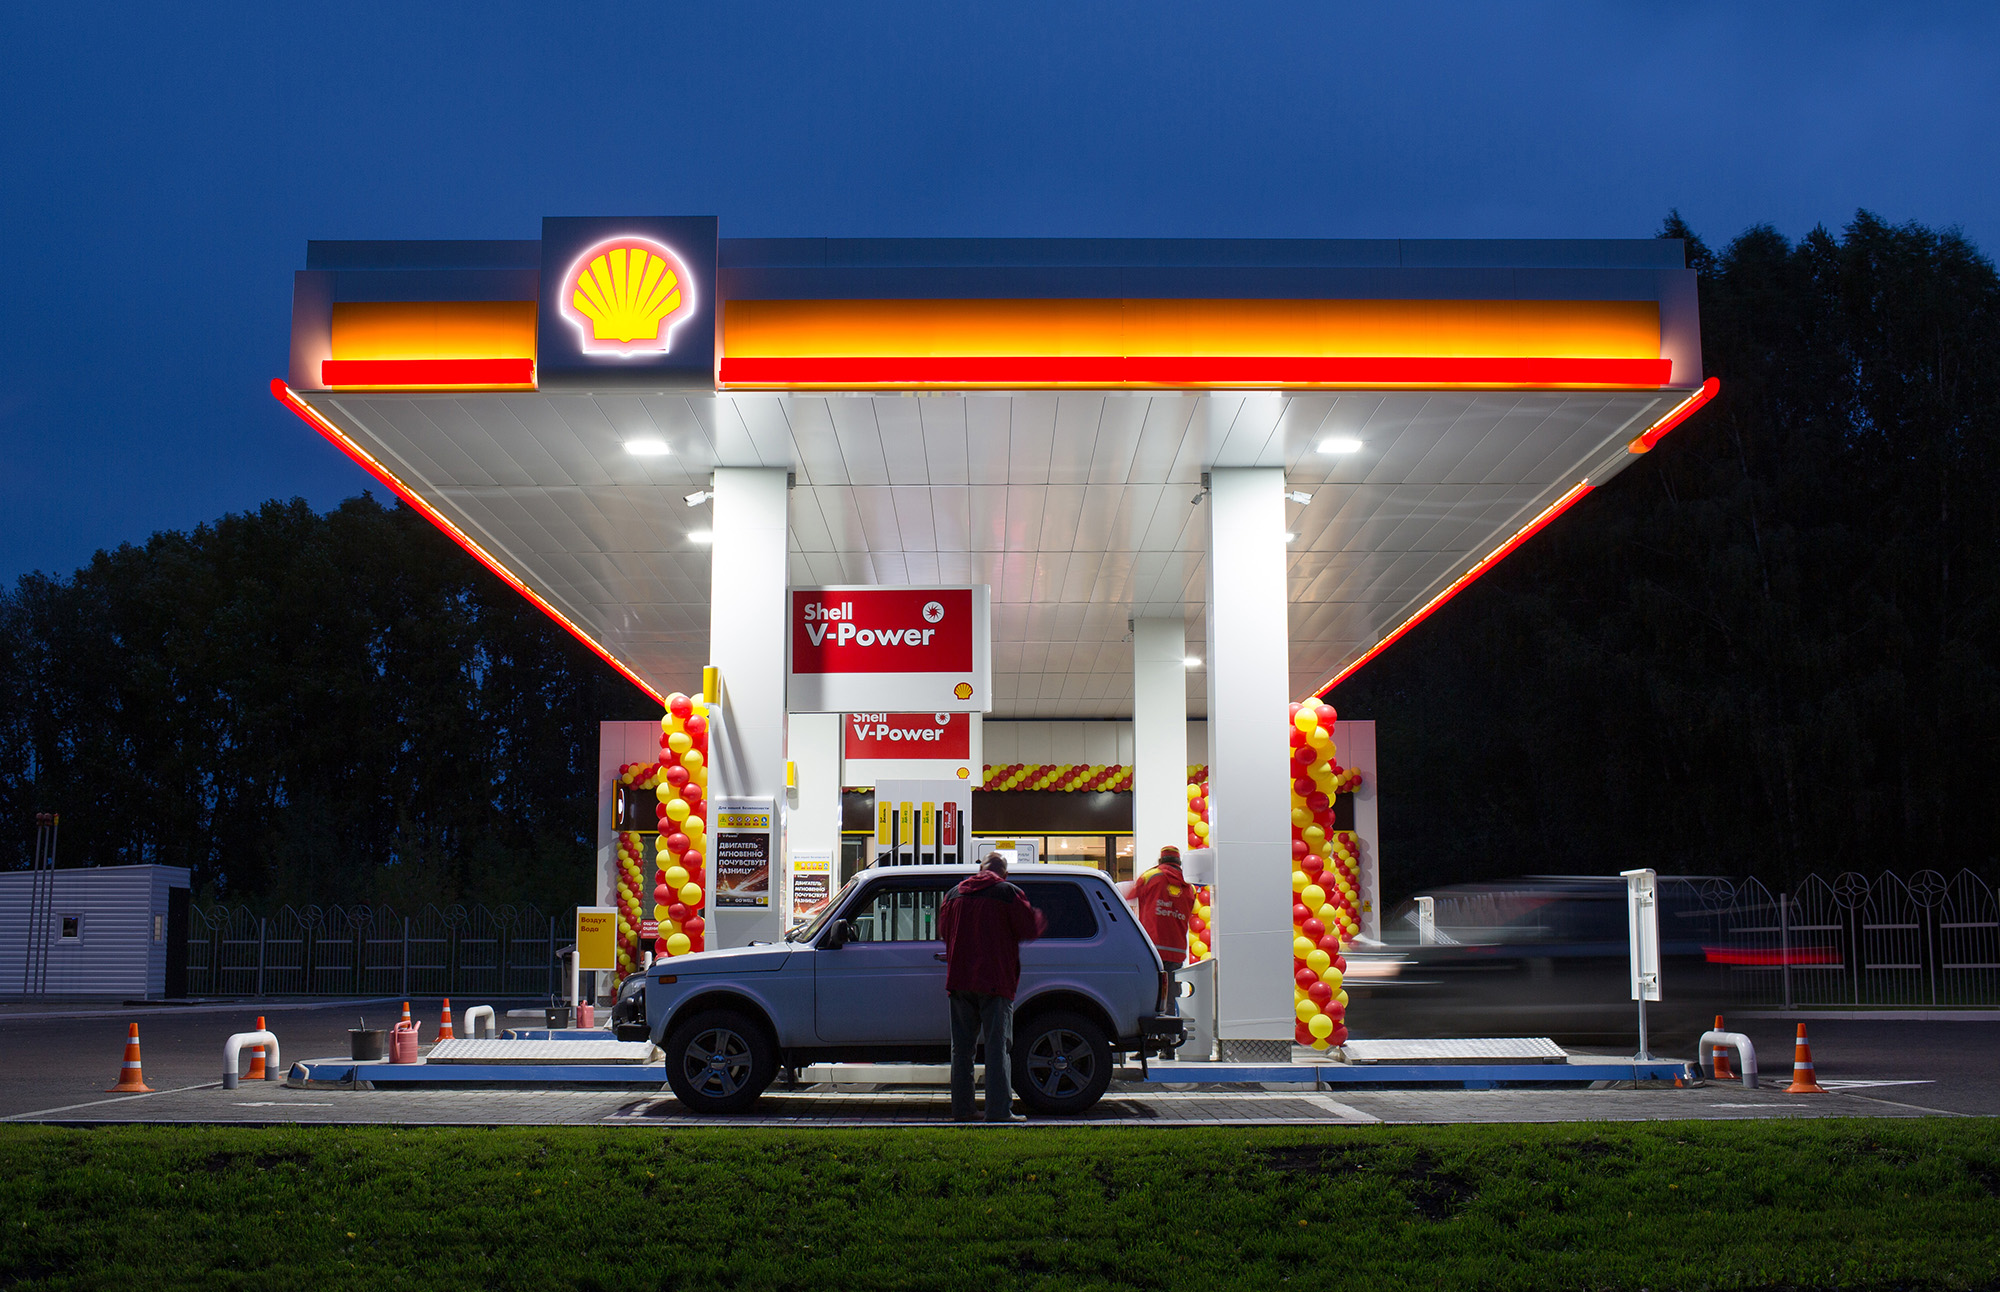 Attendants serve customers on the forecourt of a newly opened gas station, operated by Royal Dutch Shell Plc, in Kemerovo, Russia, on September 14, 2018.